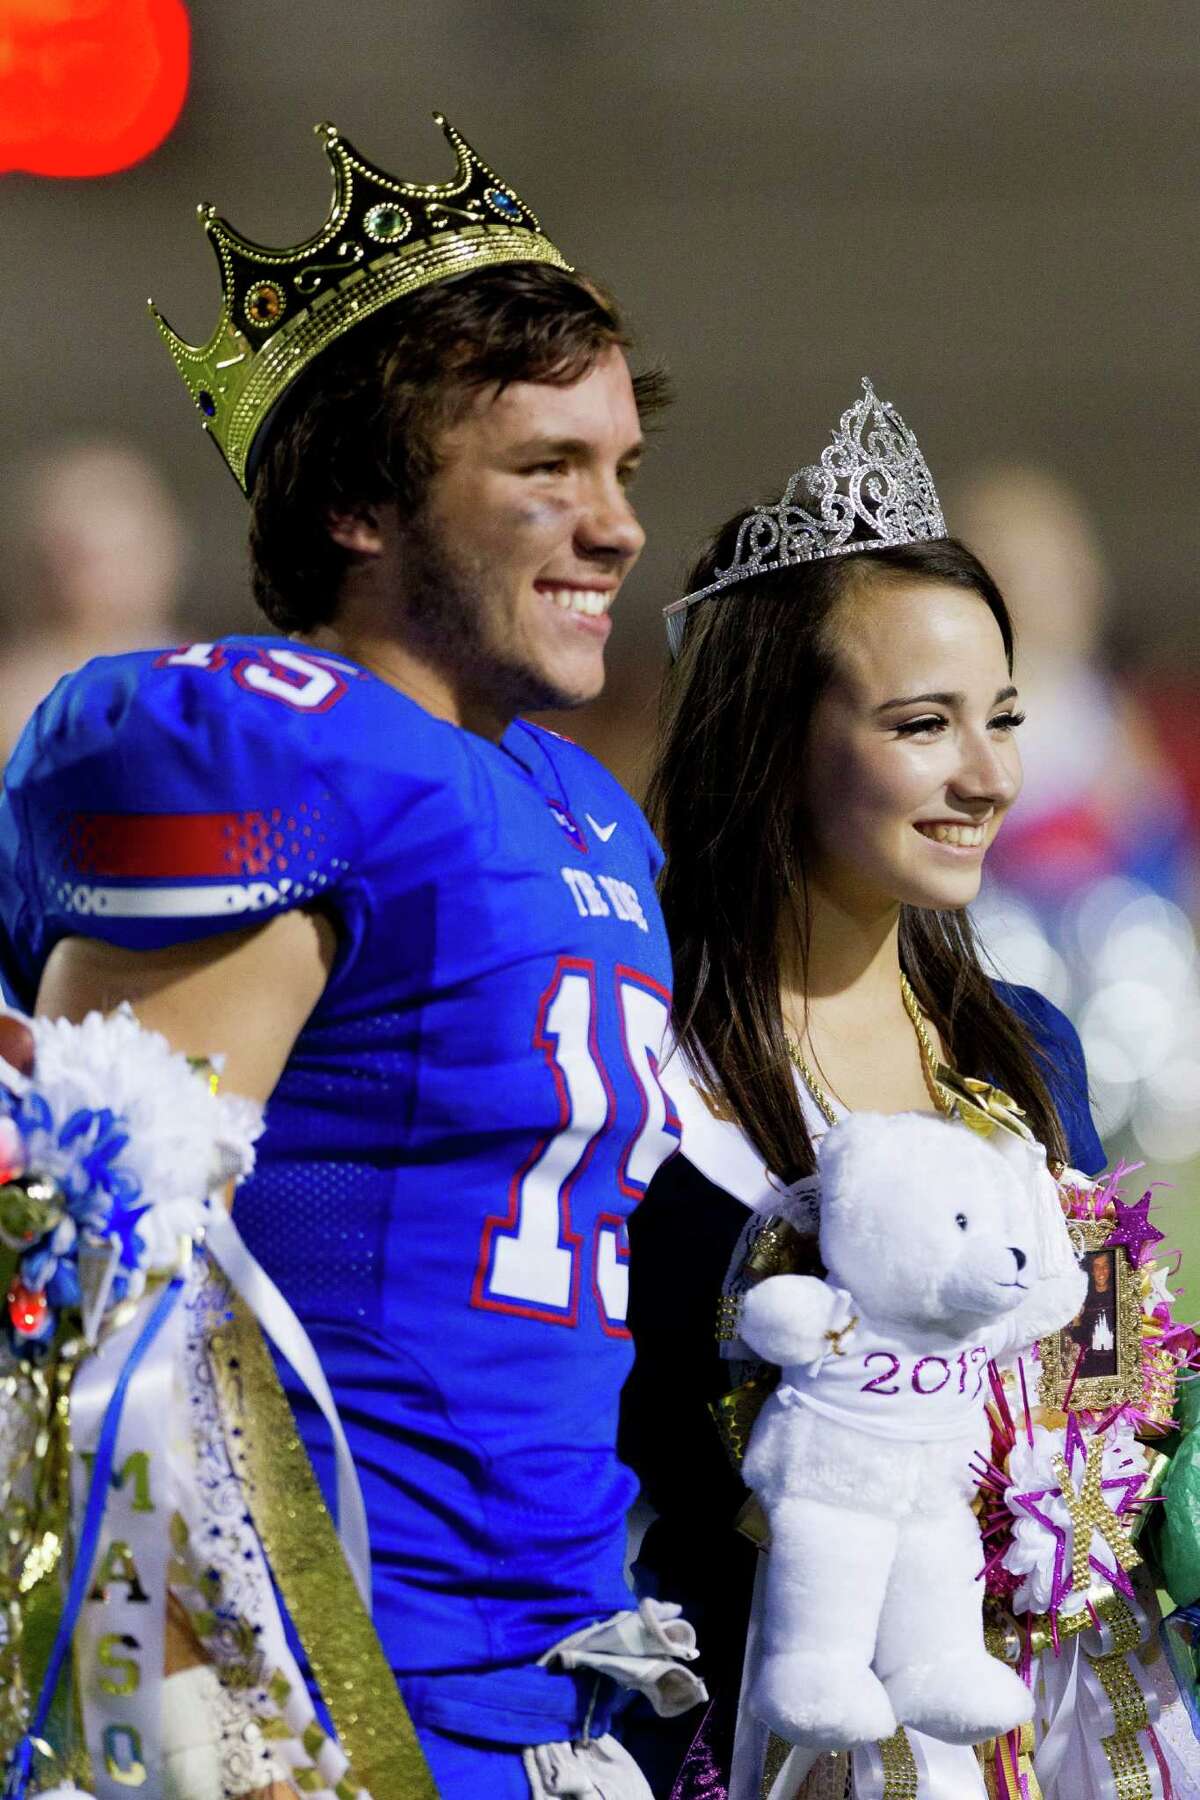 Michael Cooper and Kaylee Murillo were crowned homecoming king and queen during halftime of Oak Ridge's District 12-6A high school football game against College Park Friday in Shenandoah.